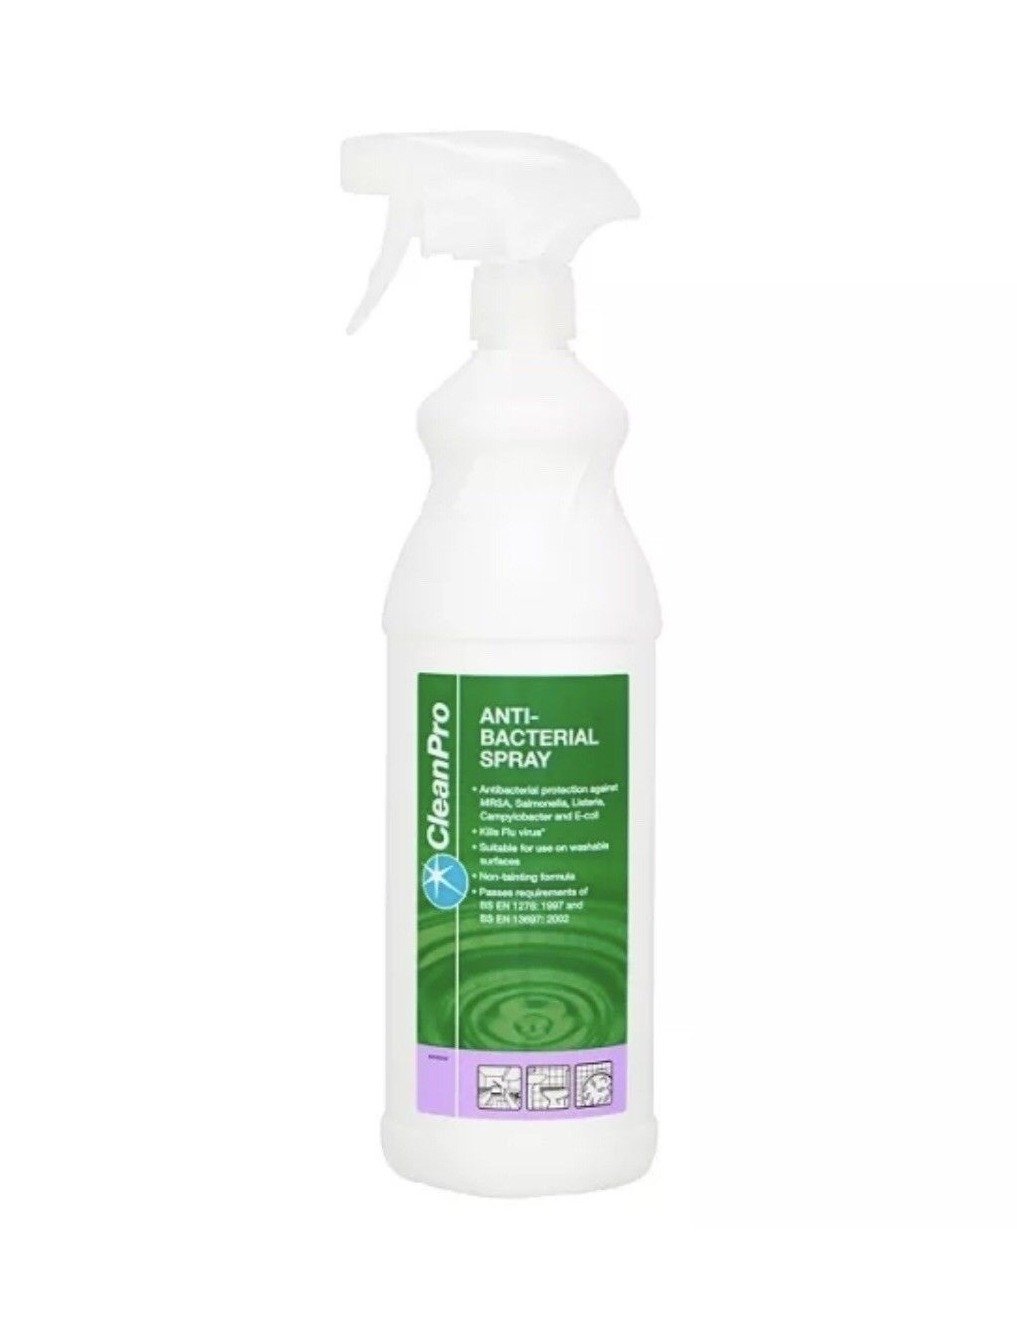 CleanPro ANTI BACTERIAL FAST ACTING SPRAY 1L - Smile Europe Wholesale 